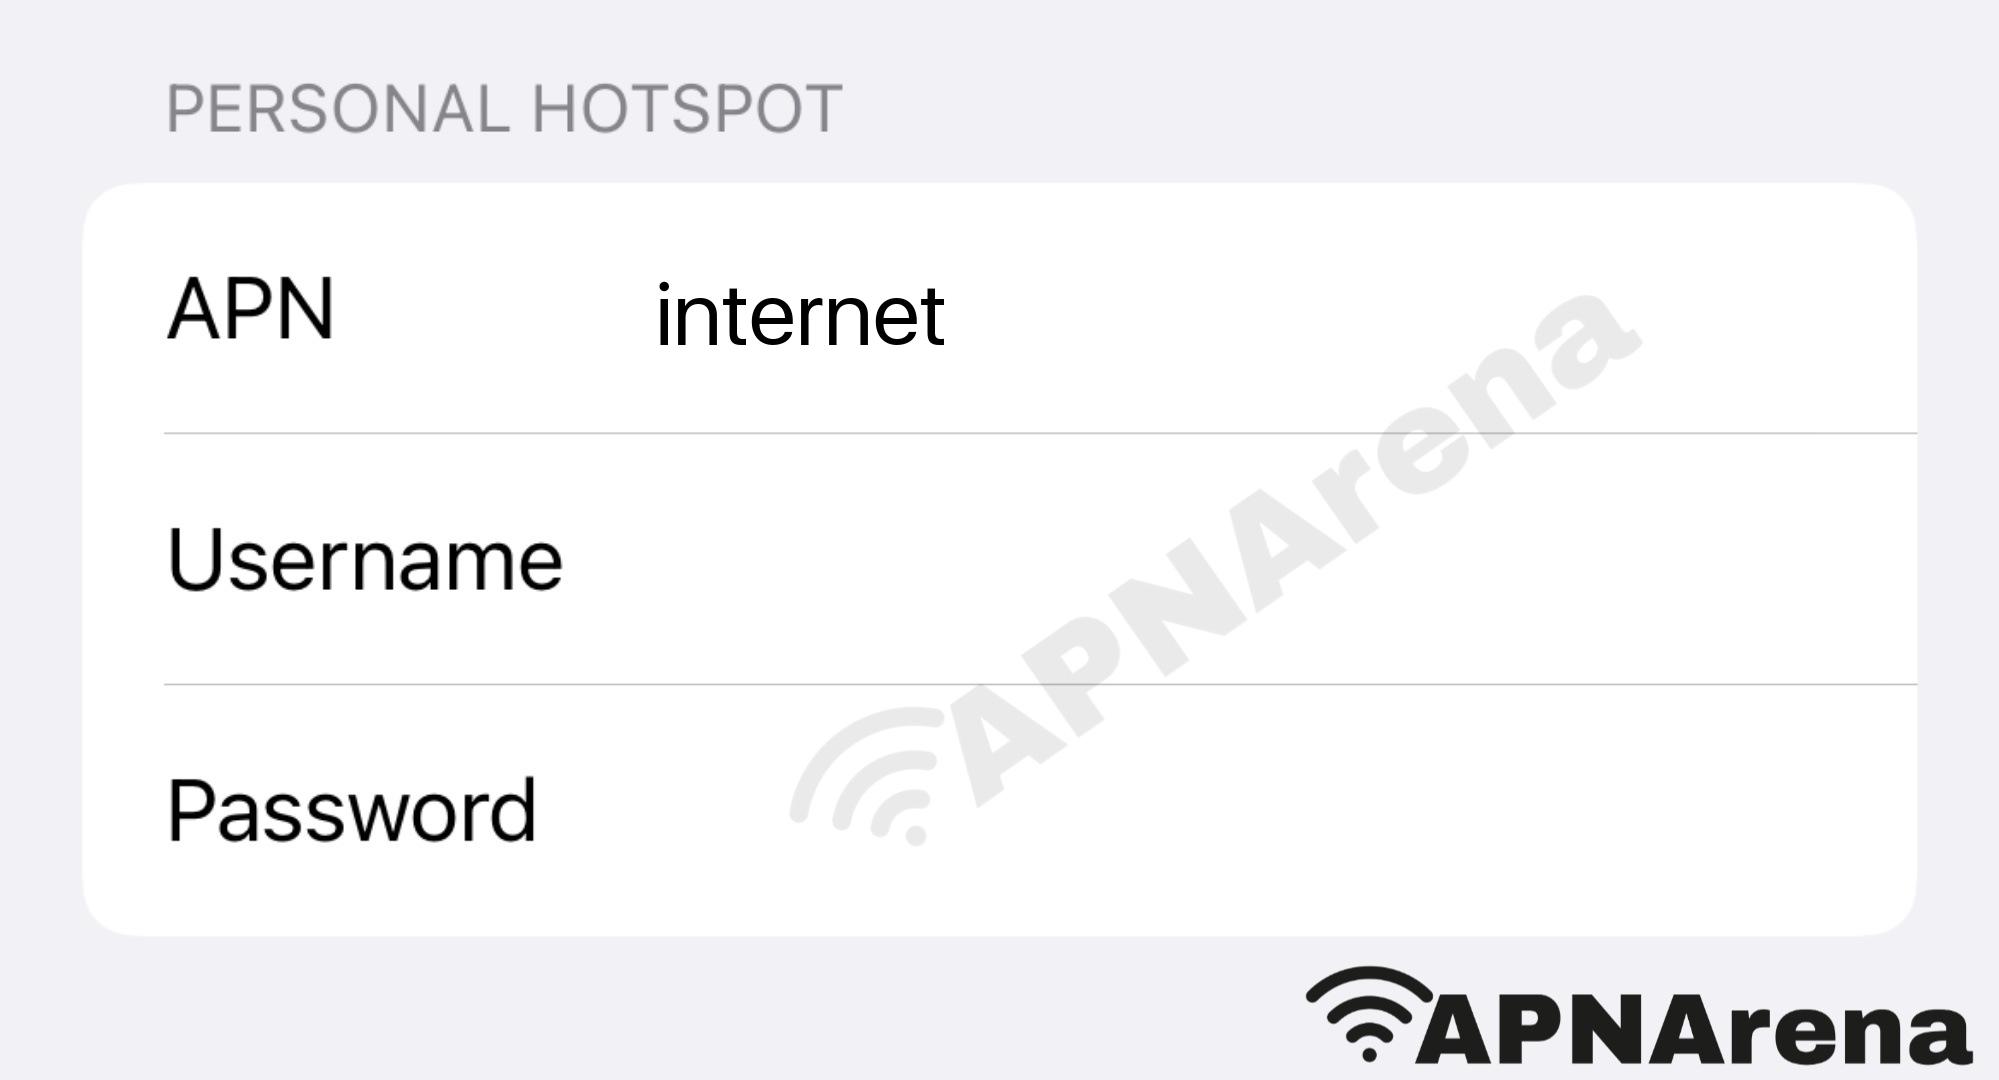 AfriMobile Personal Hotspot Settings for iPhone